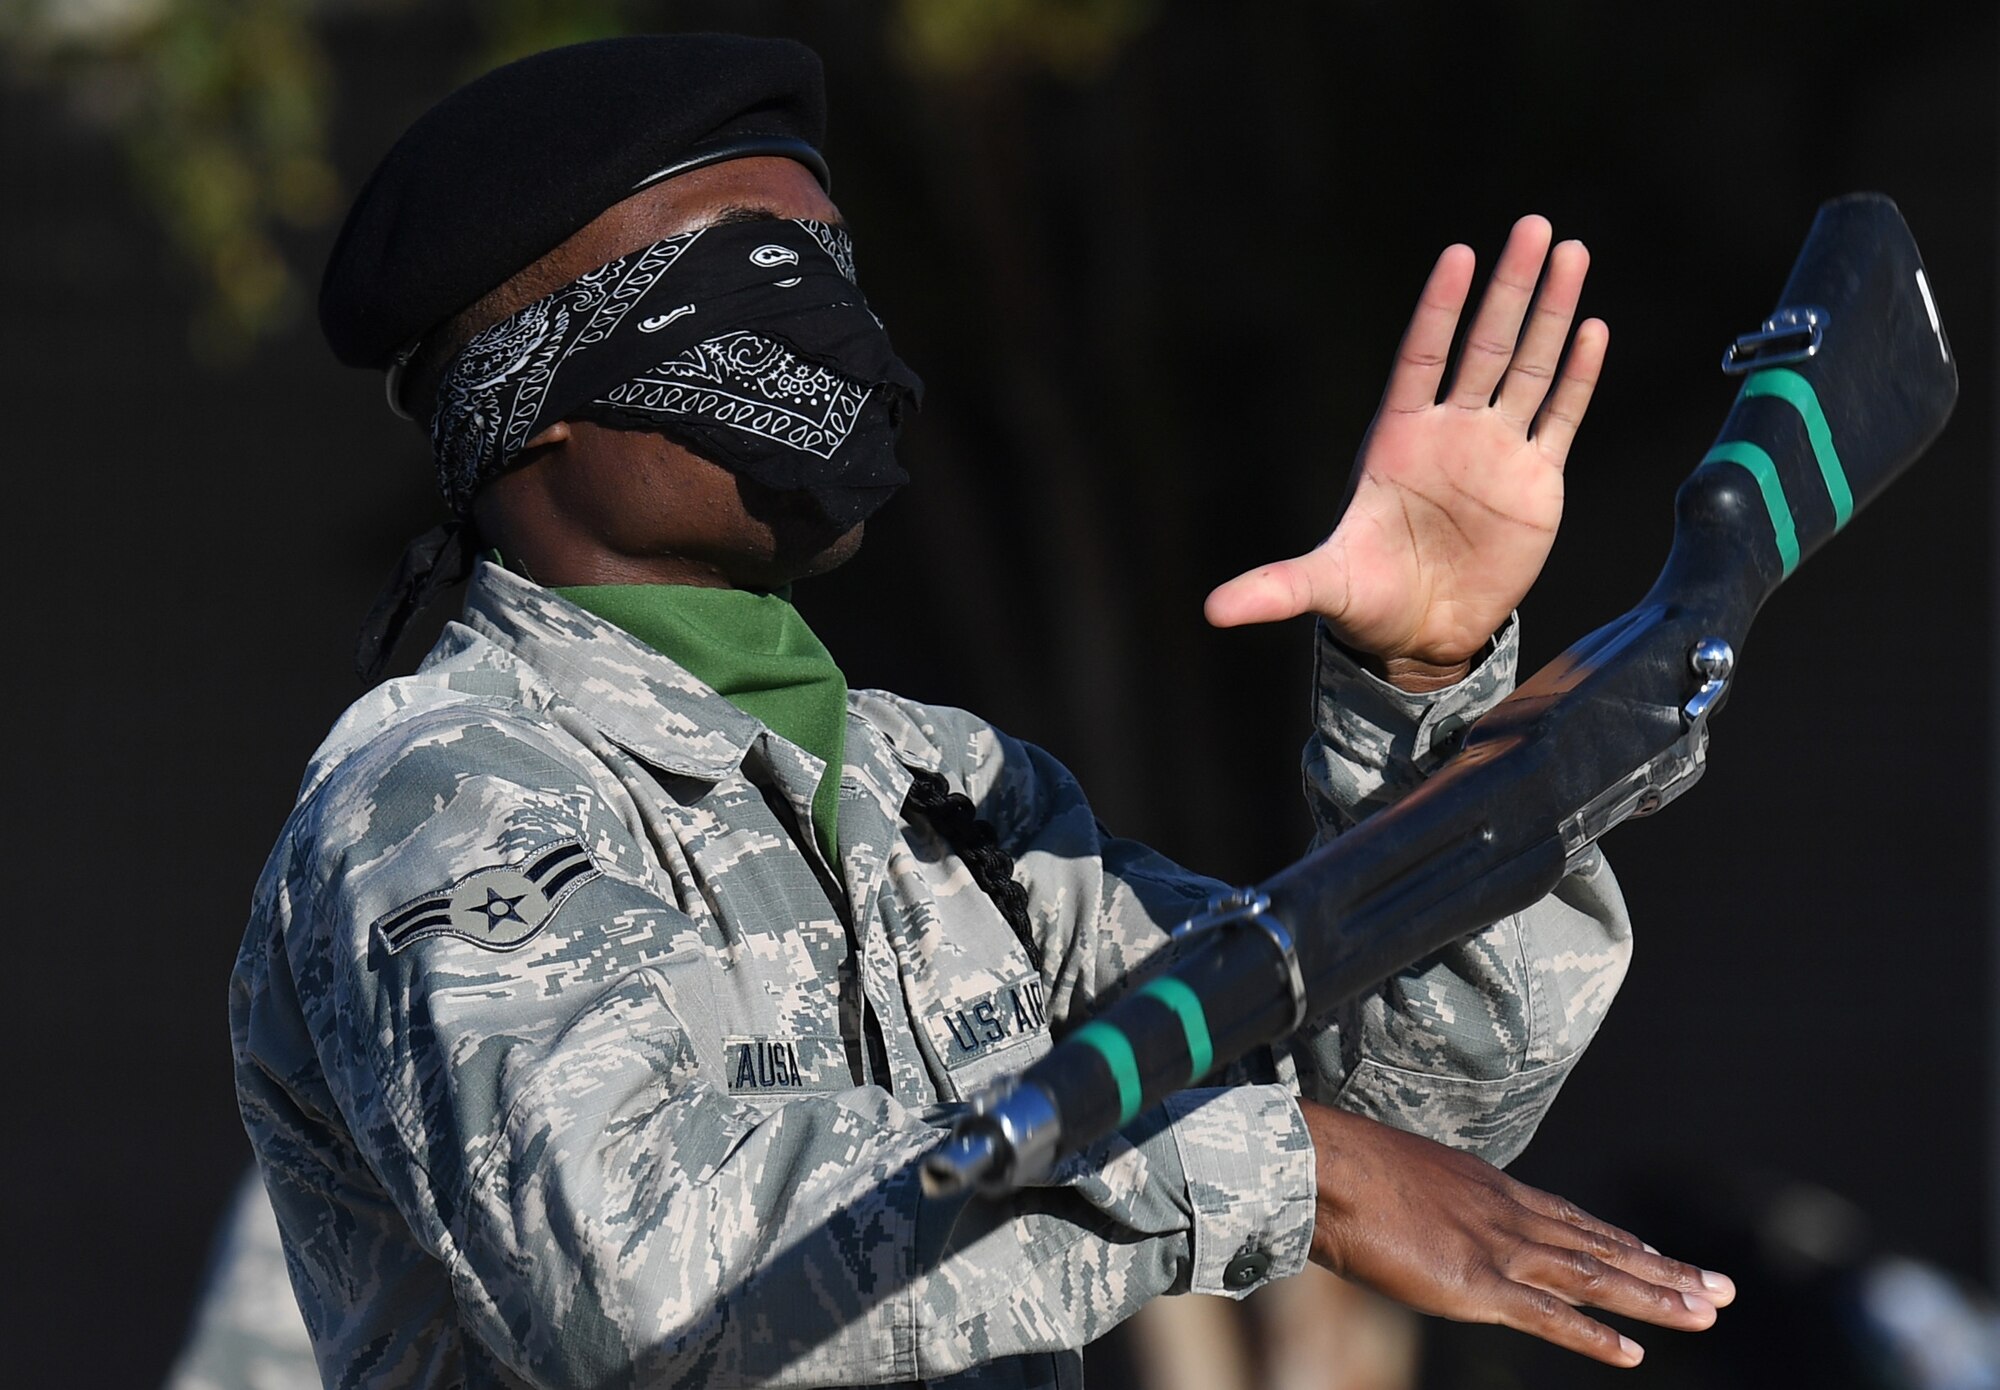 U.S. Air Force Airman 1st Class Abdulahi Alausa, 334th Training Squadron freestyle drill team member, performs during the 81st Training Group drill down on the Levitow Training Support Facility drill pad at Keesler Air Force Base, Mississippi, Nov. 1, 2019. Airmen from the 81st TRG competed in a quarterly open ranks inspection, regulation drill routine and freestyle drill routine. Keesler trains more than 30,000 students each year. While in training, Airmen are given the opportunity to volunteer to learn and execute drill down routines. (U.S. Air Force photo by Kemberly Groue)